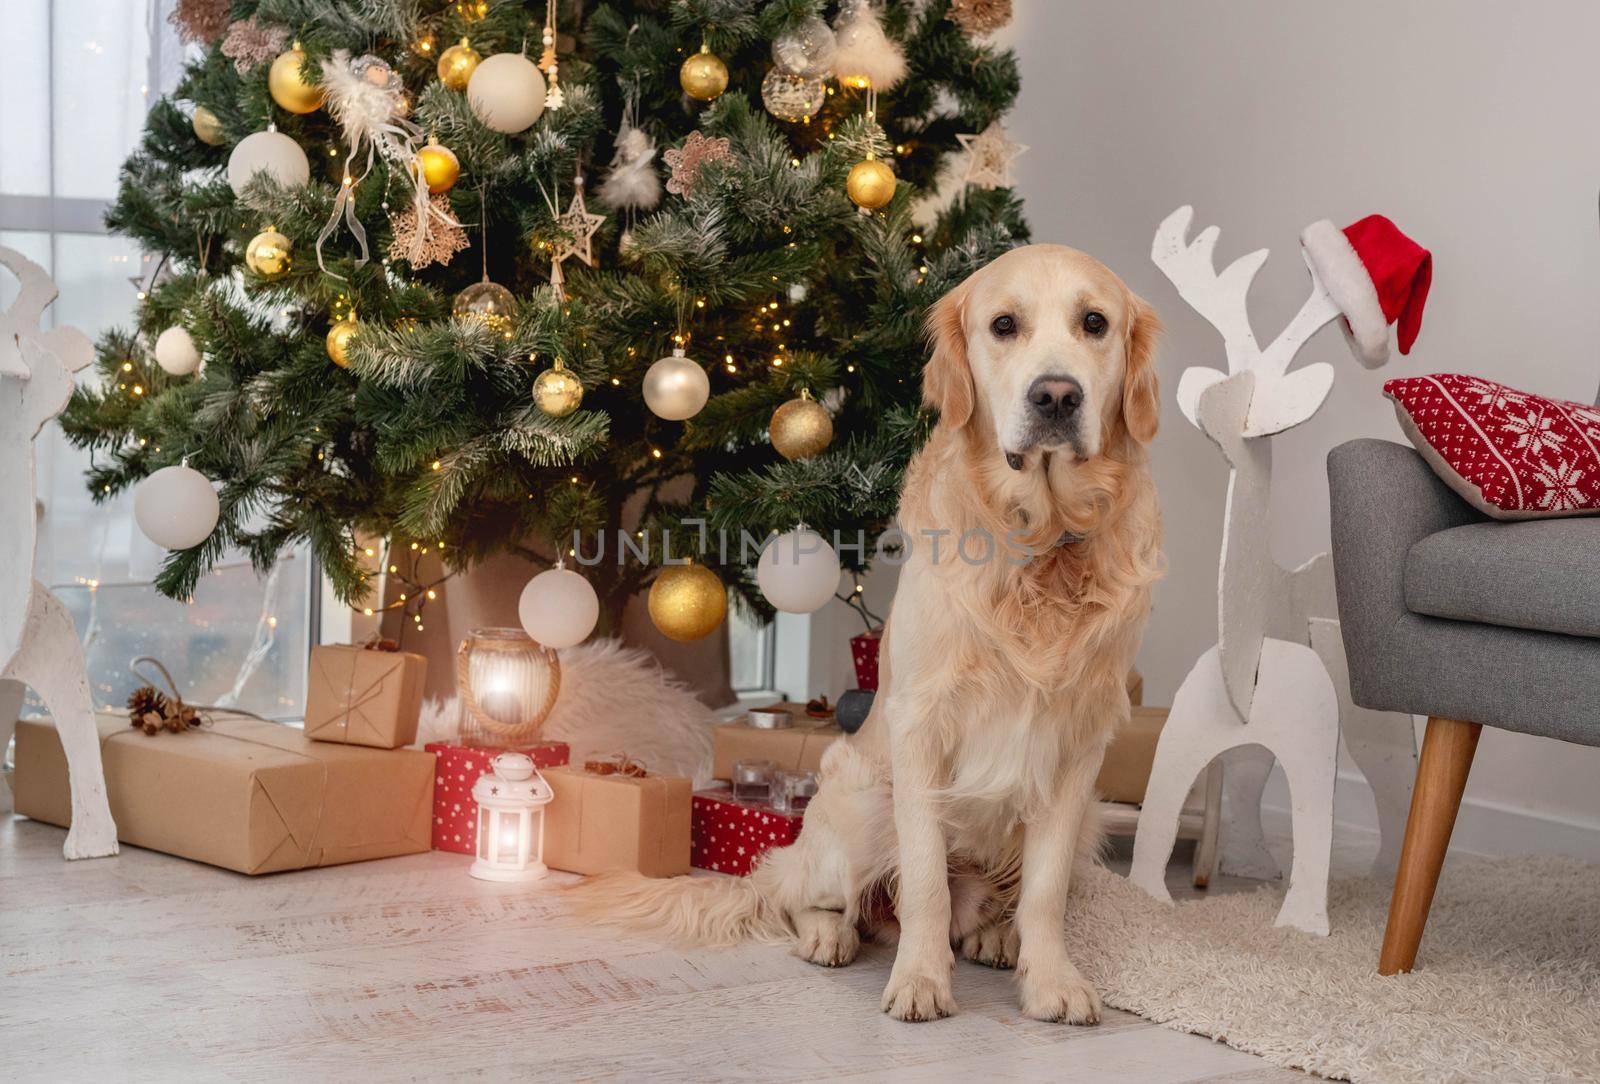 Golden retriever dog lying on room floor under christmas tree with illuminations and decorations